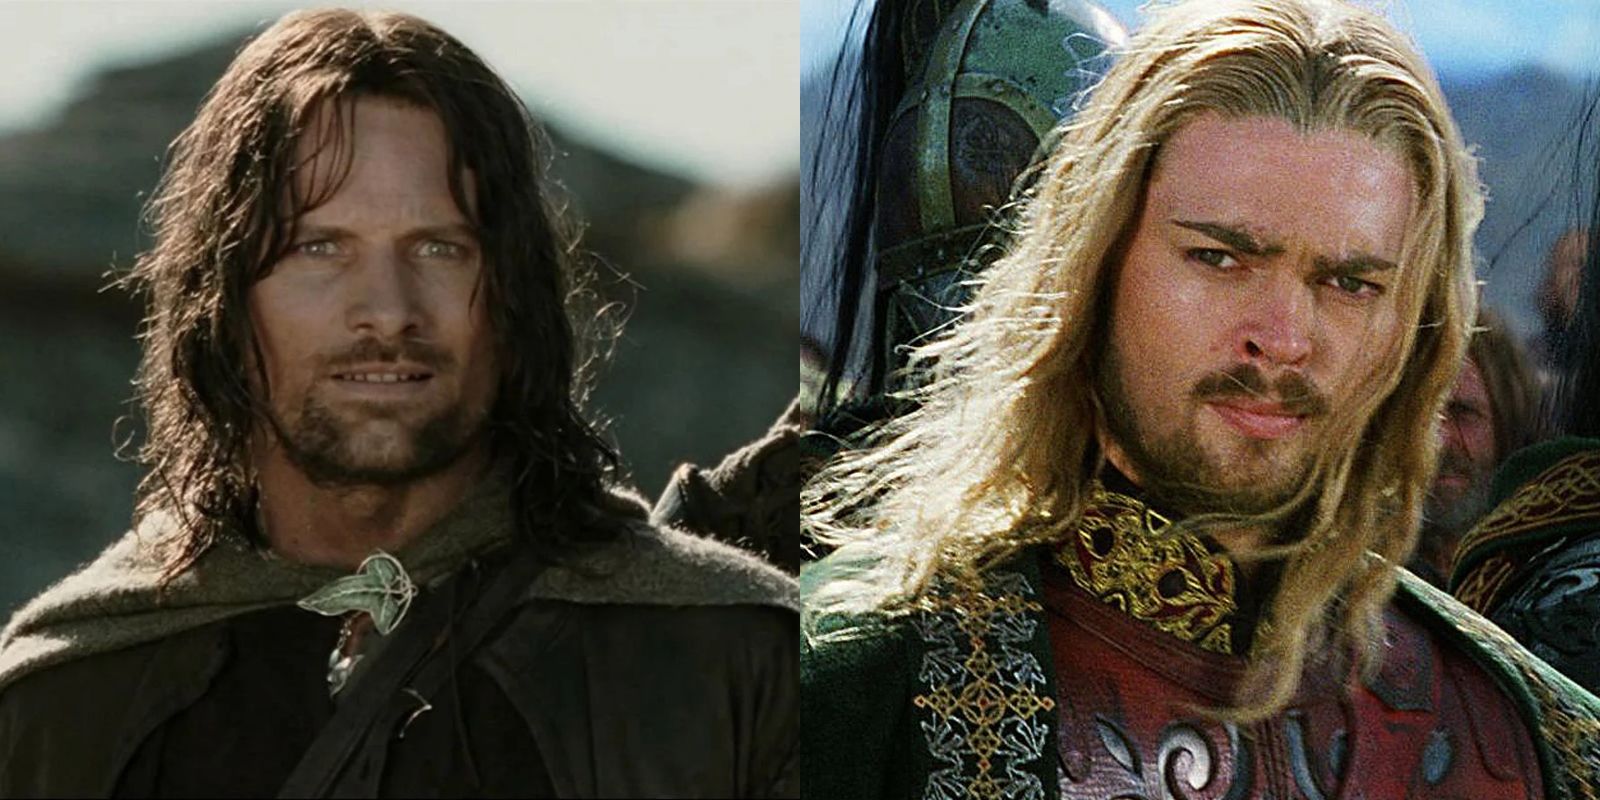 Lord Of The Rings: 10 Of The Nicest Things Aragorn Did